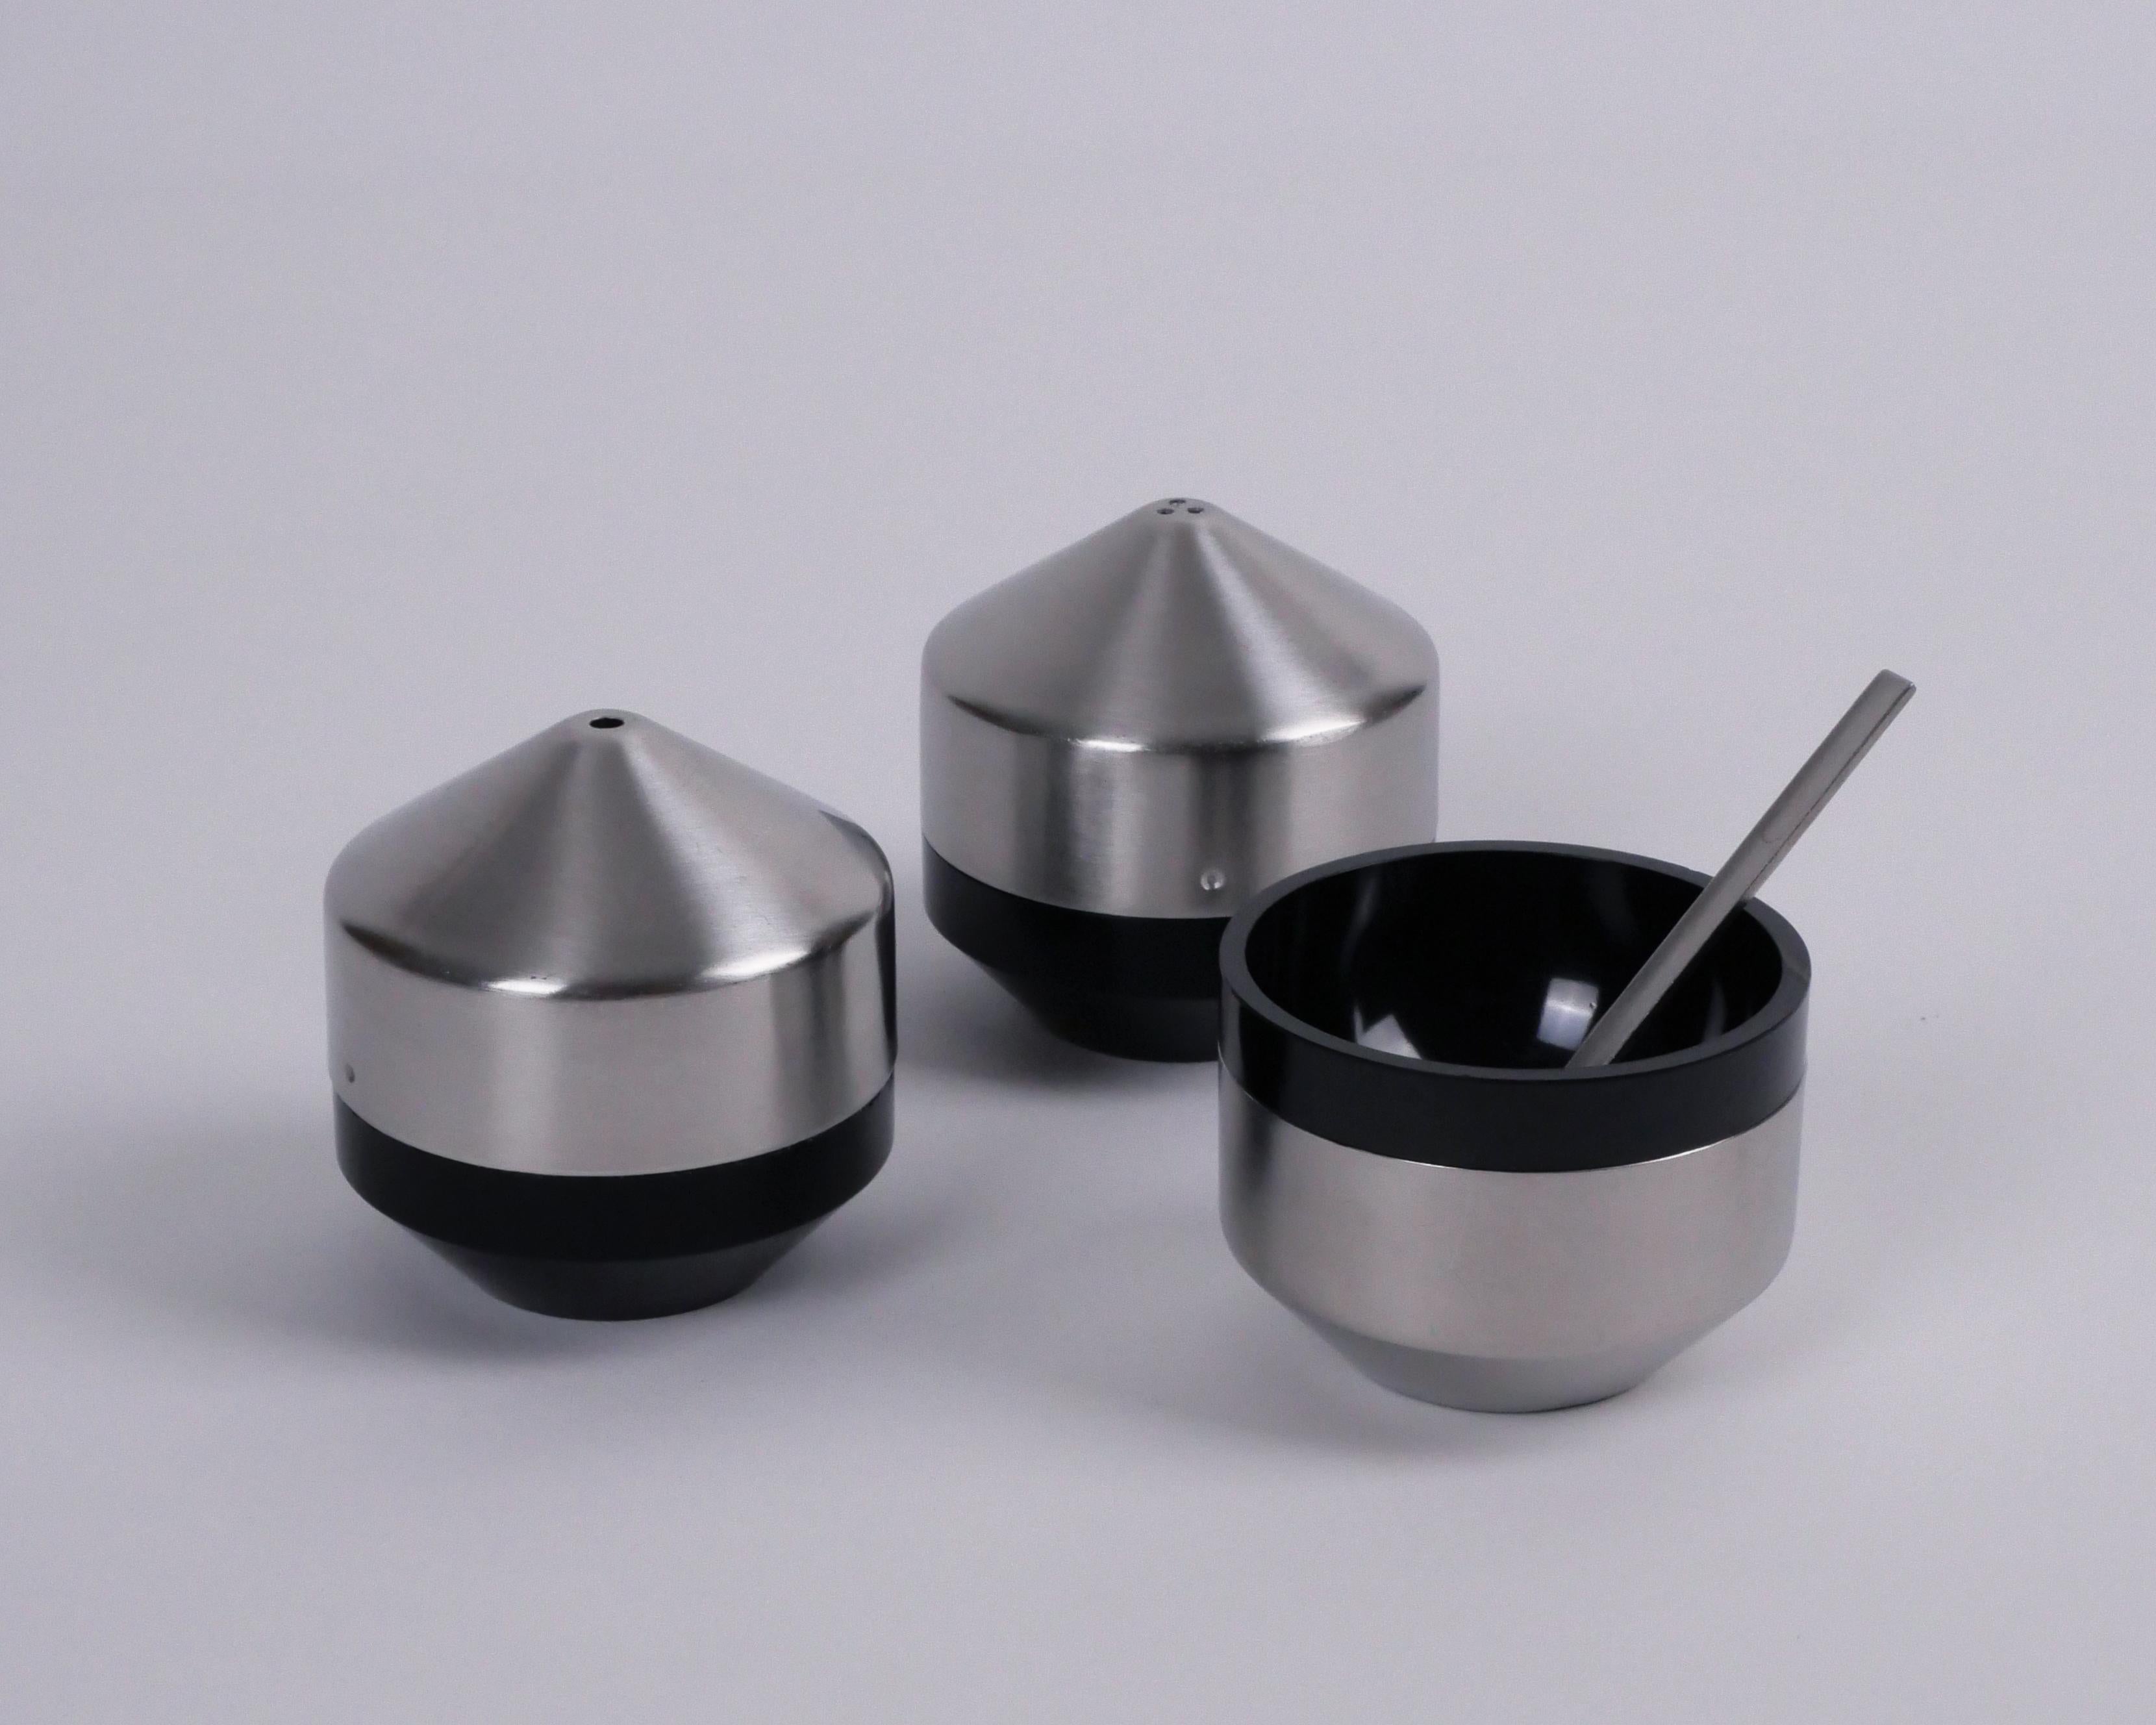 Robert Welch for Old Hall, 1962-4
'Alveston' condiment set

Stainless steel with black plastic inserts
Very good condition, with only light marks
Makers stamp to underside of each

A super, mid-century set, elegant as a display set but also